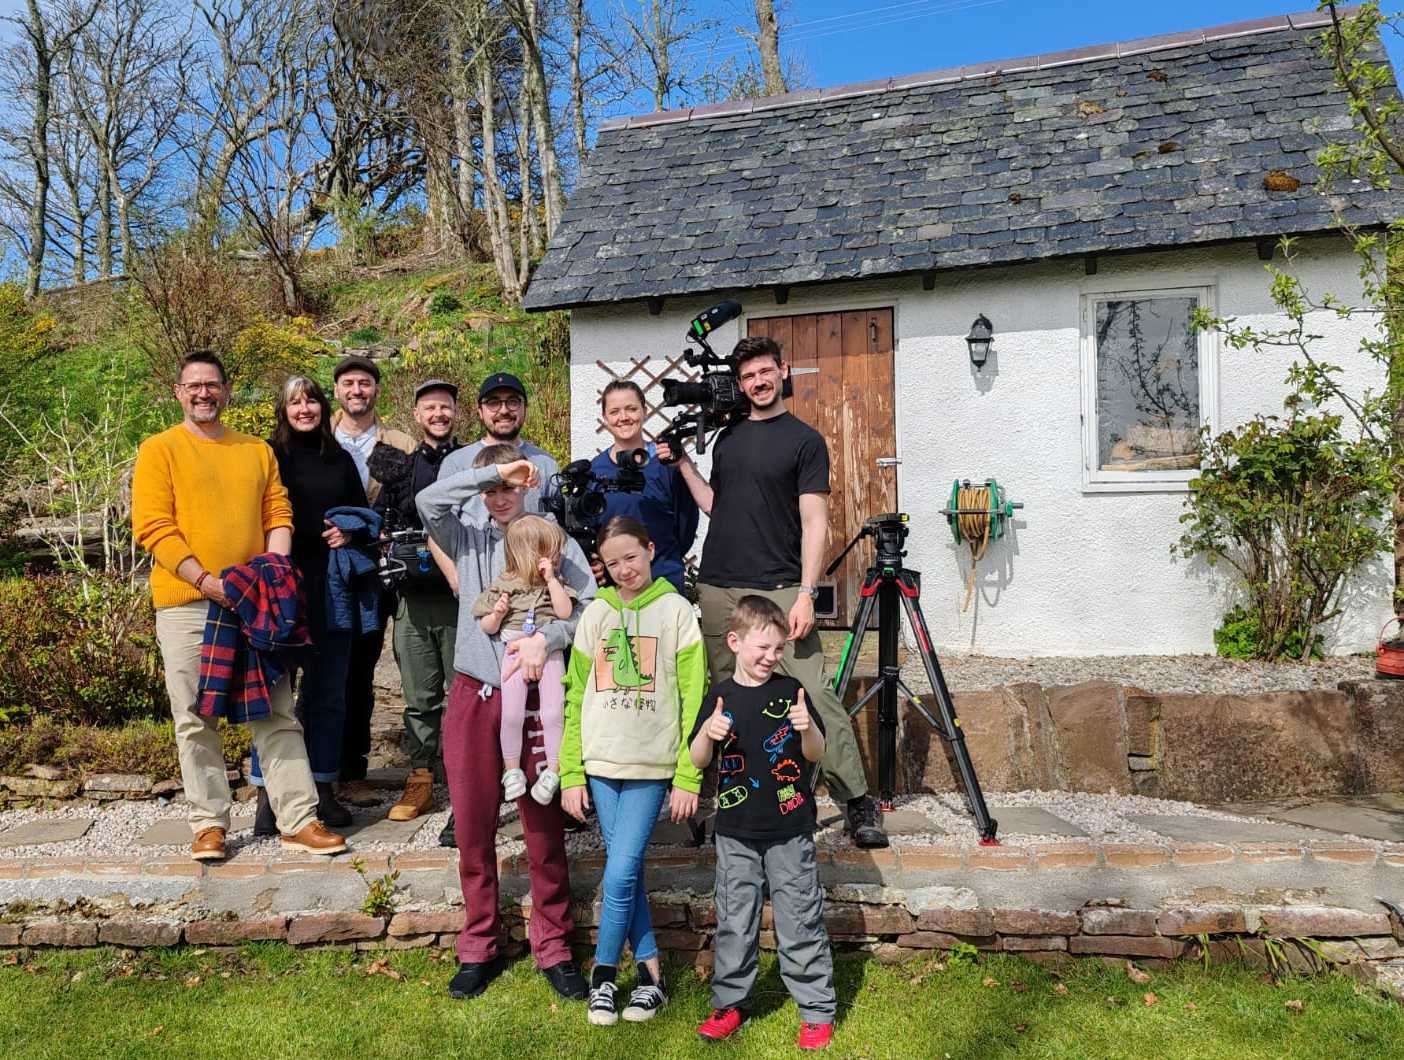 Kayleigh and Jamie Macleod said the BBC crew from Escape to the Country were 'fantastic'. Picture: Kayleigh Macleod